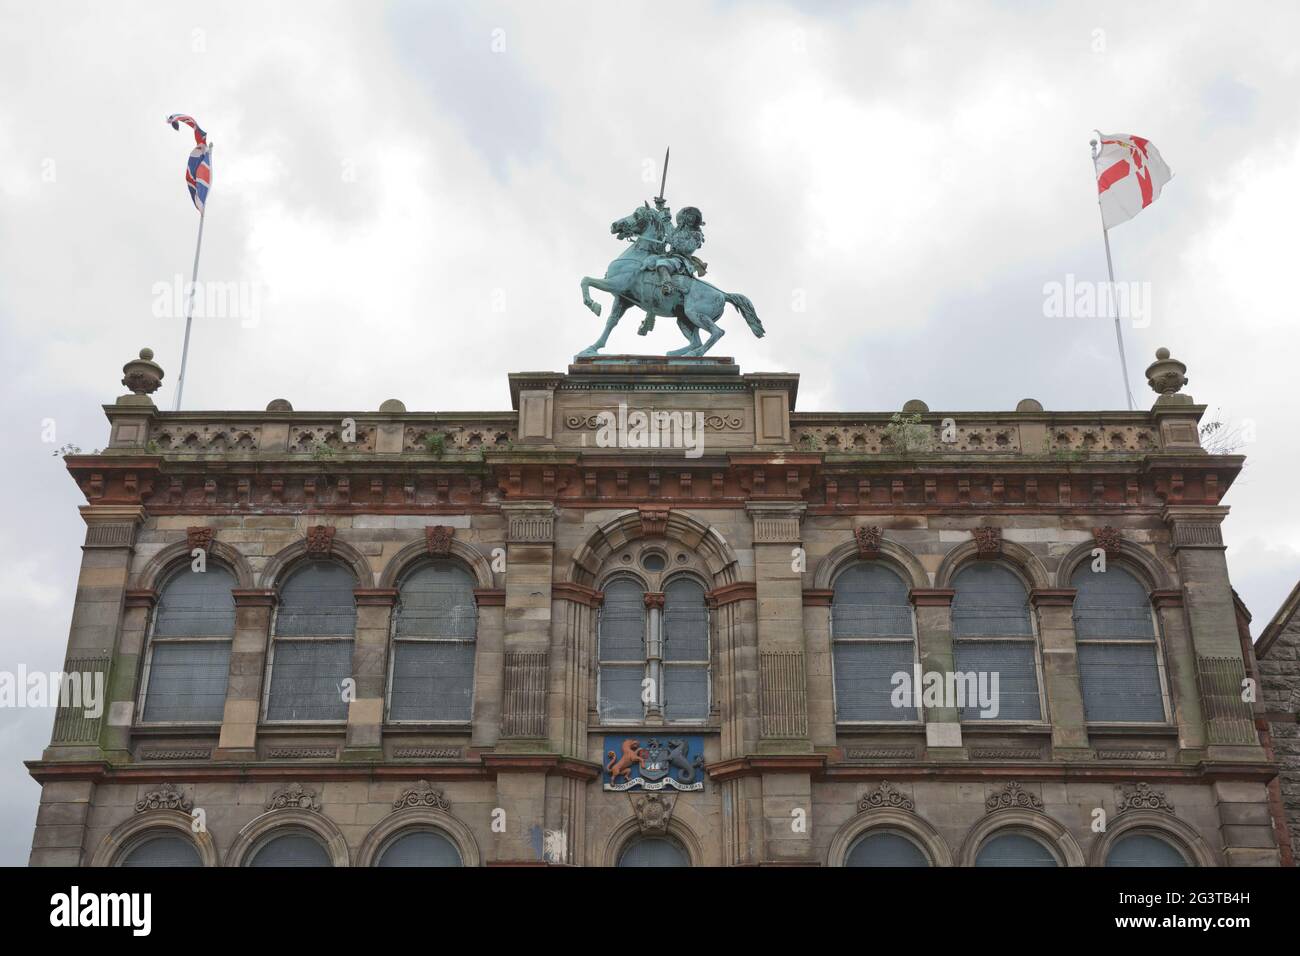 Belfast Orange Hall on Clifton Street with statue of king william on th.e top and stone facade Stock Photo